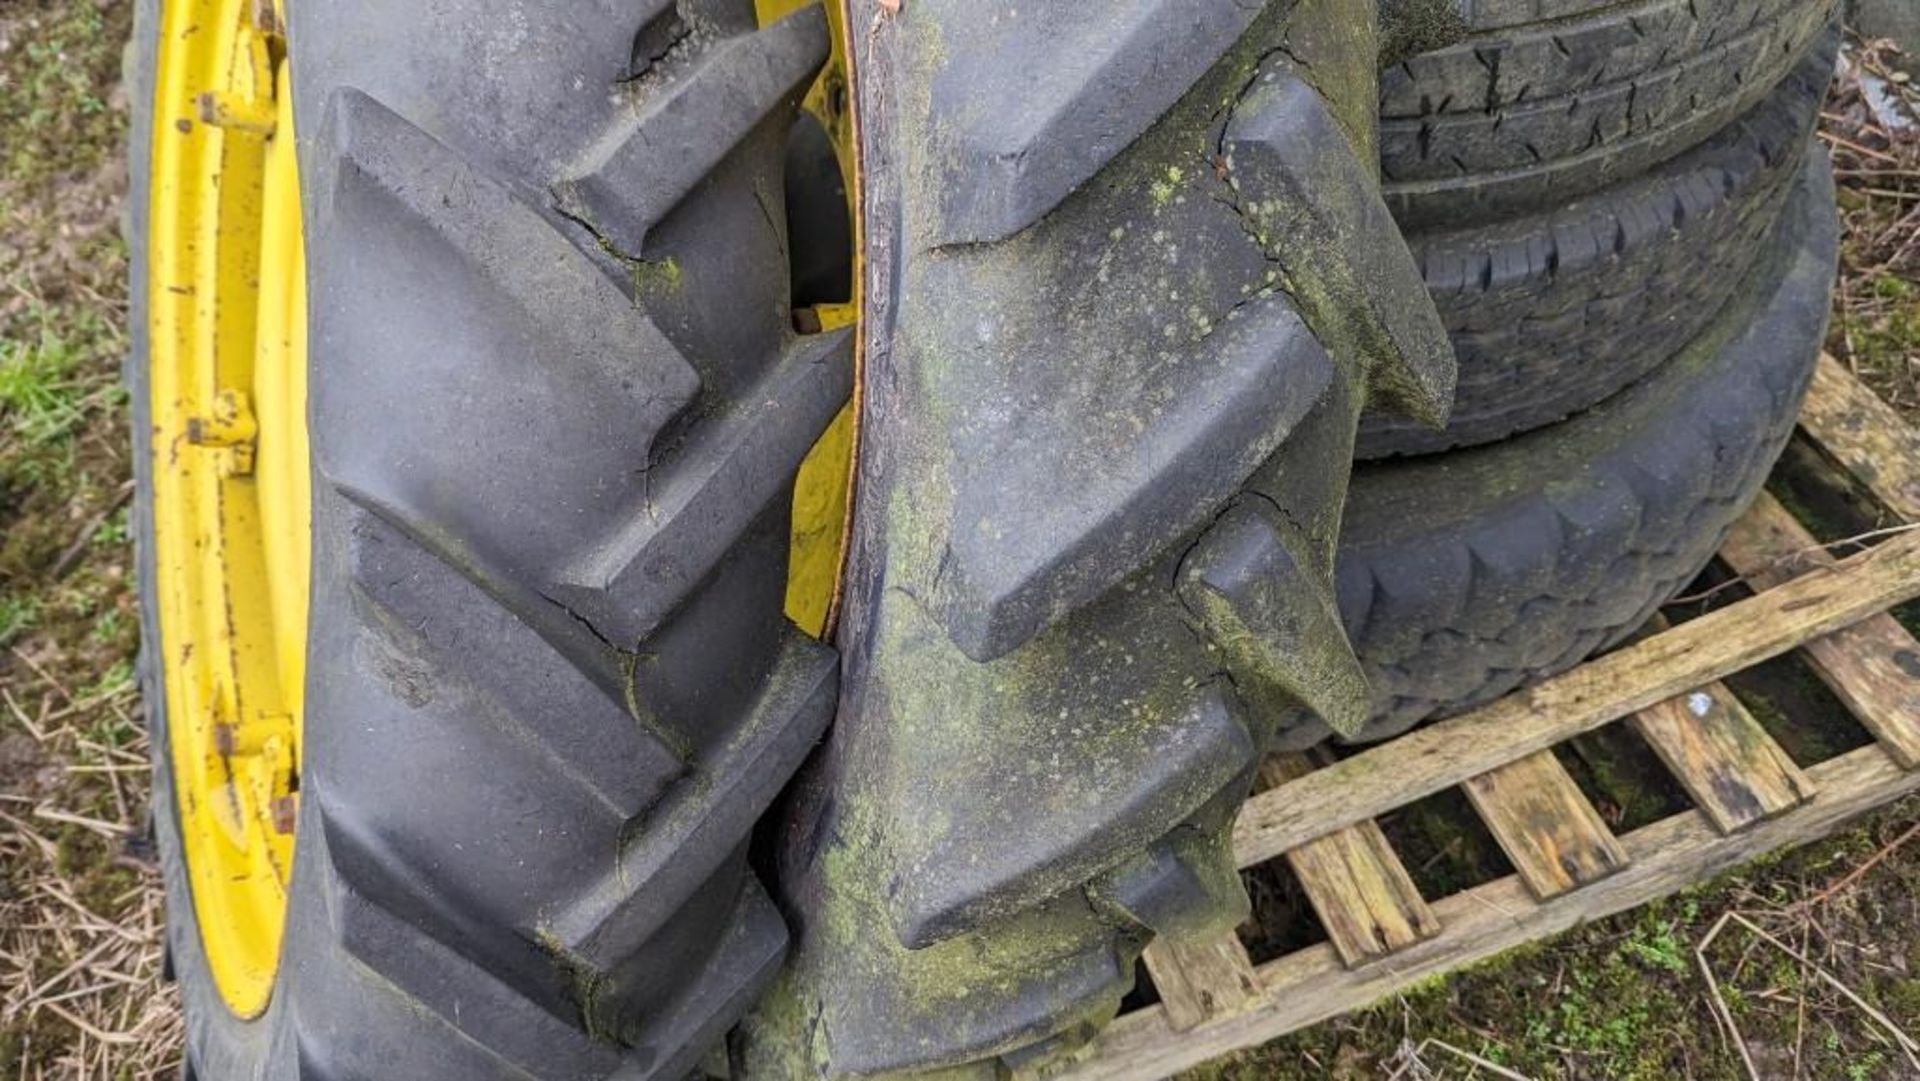 Row Crop Wheels and Tyres - 9.5R32 and 230/95R48 - (Yorkshire) - Image 4 of 4